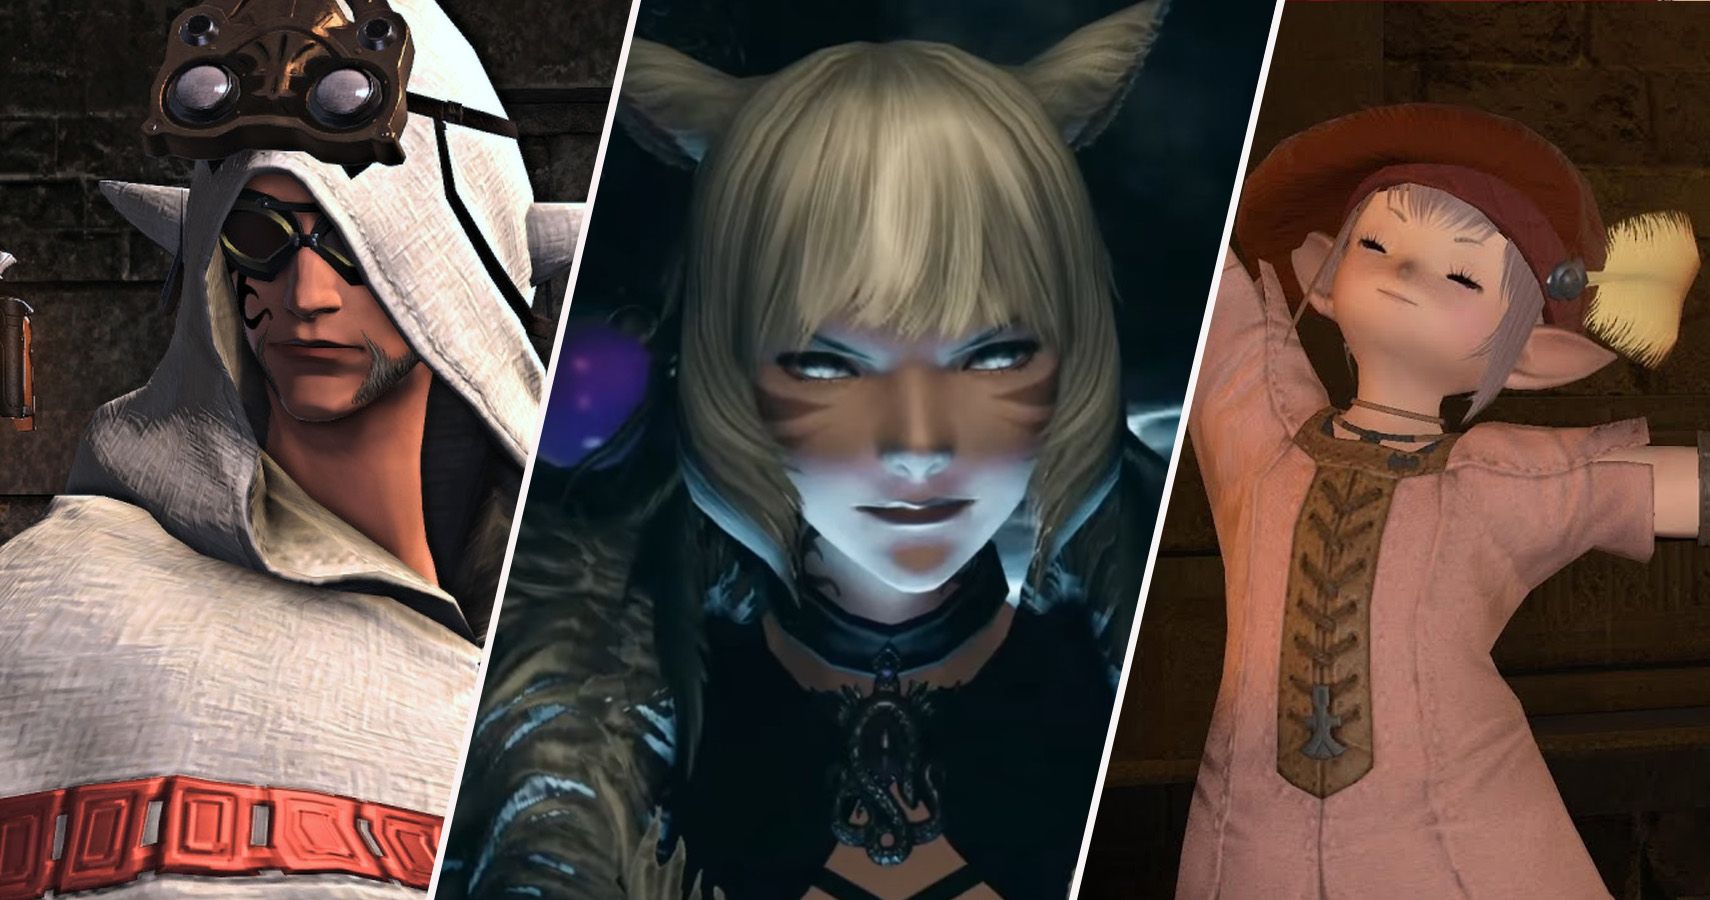 1000+ images about Final Fantasy XIV on Pinterest